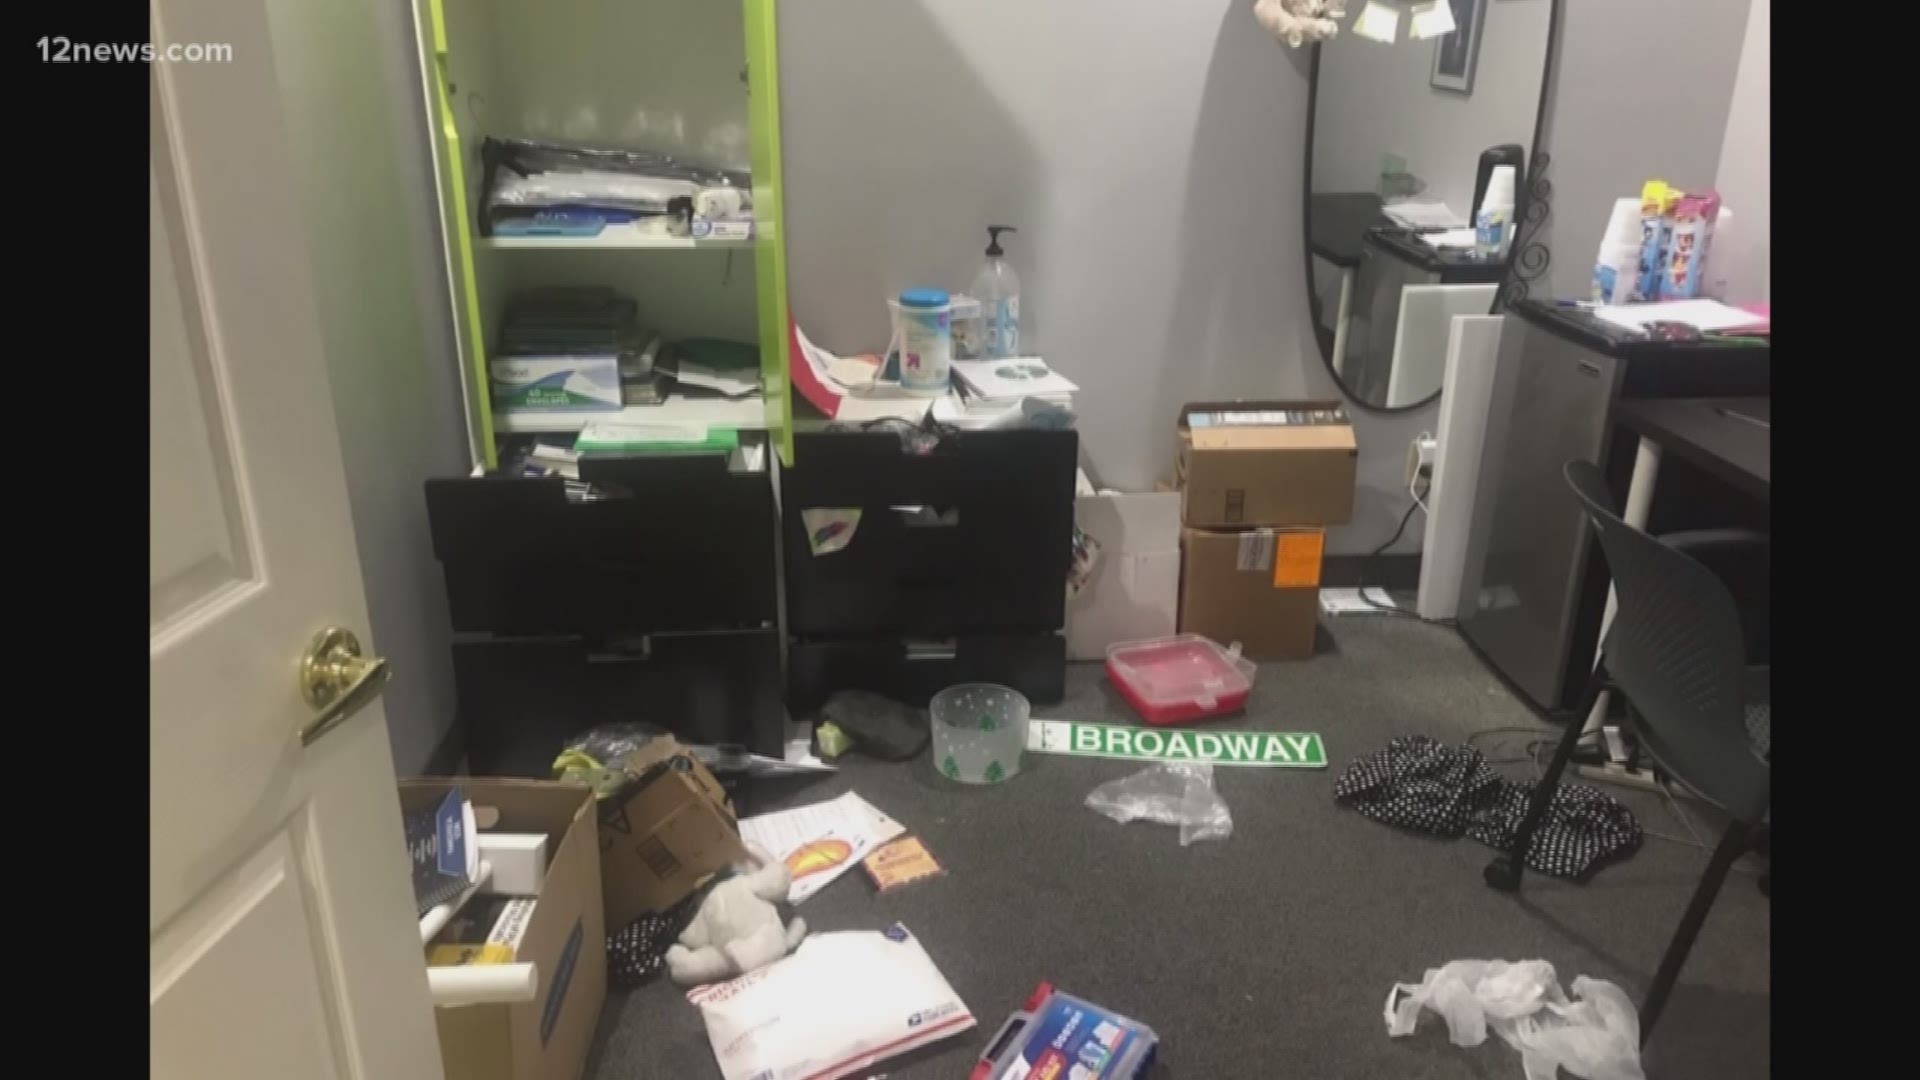 Someone broke into the Ahwatukee Children's Theater's rehearsal space overnight on Sunday and stole about 12 thousand dollars worth of electronics, including keyboards, microphones and a sound system. So far no arrests have been made.